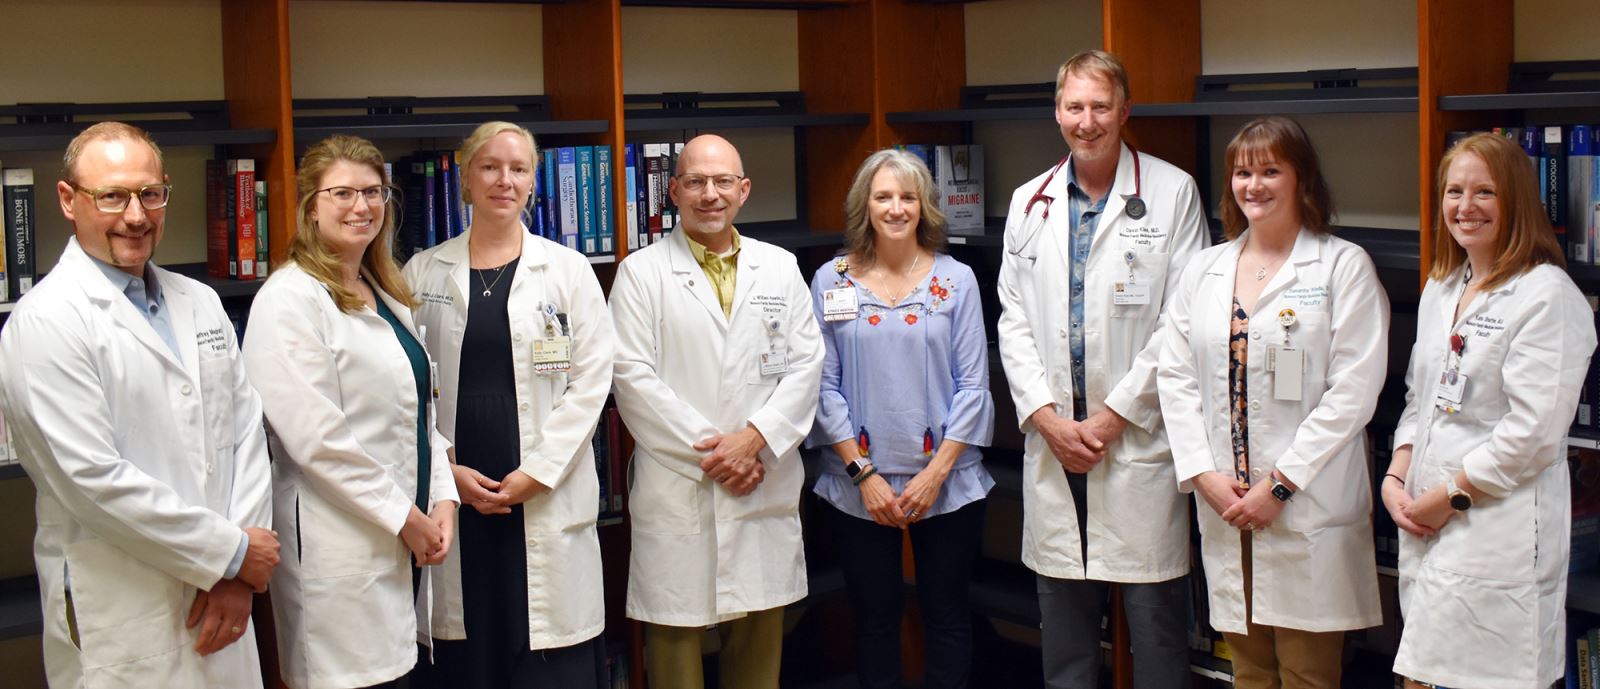 Faculty with the Munson Family Practice Residency Program